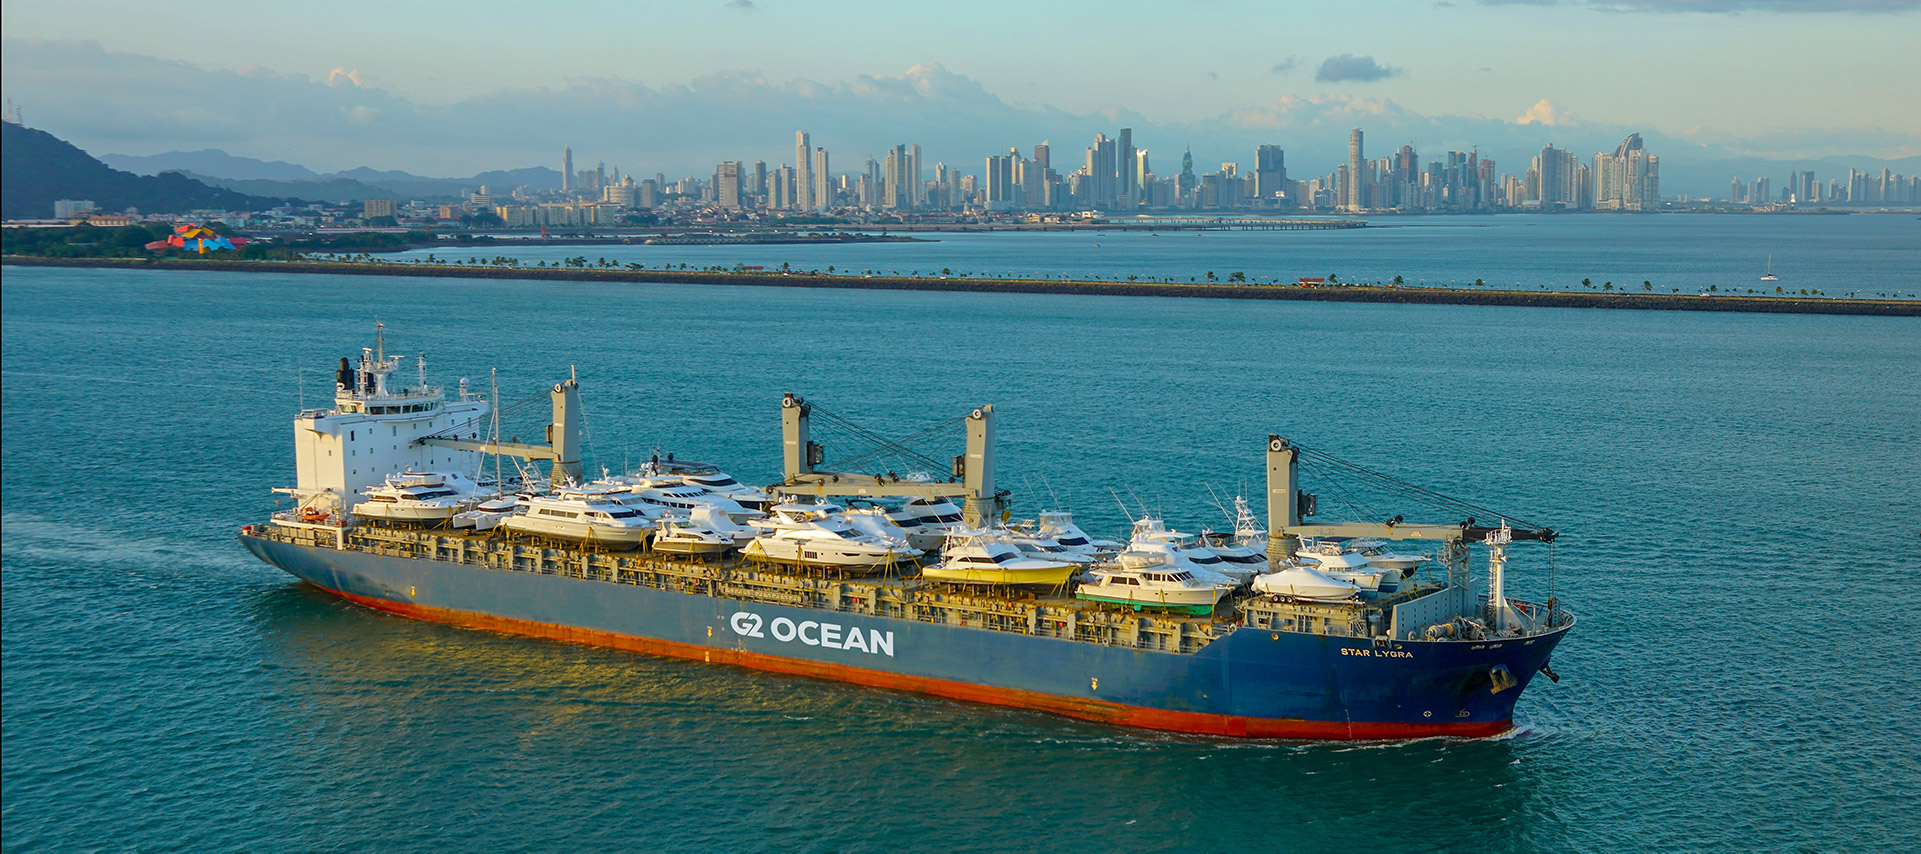 G2 Ocean publishes first whole-year financial report